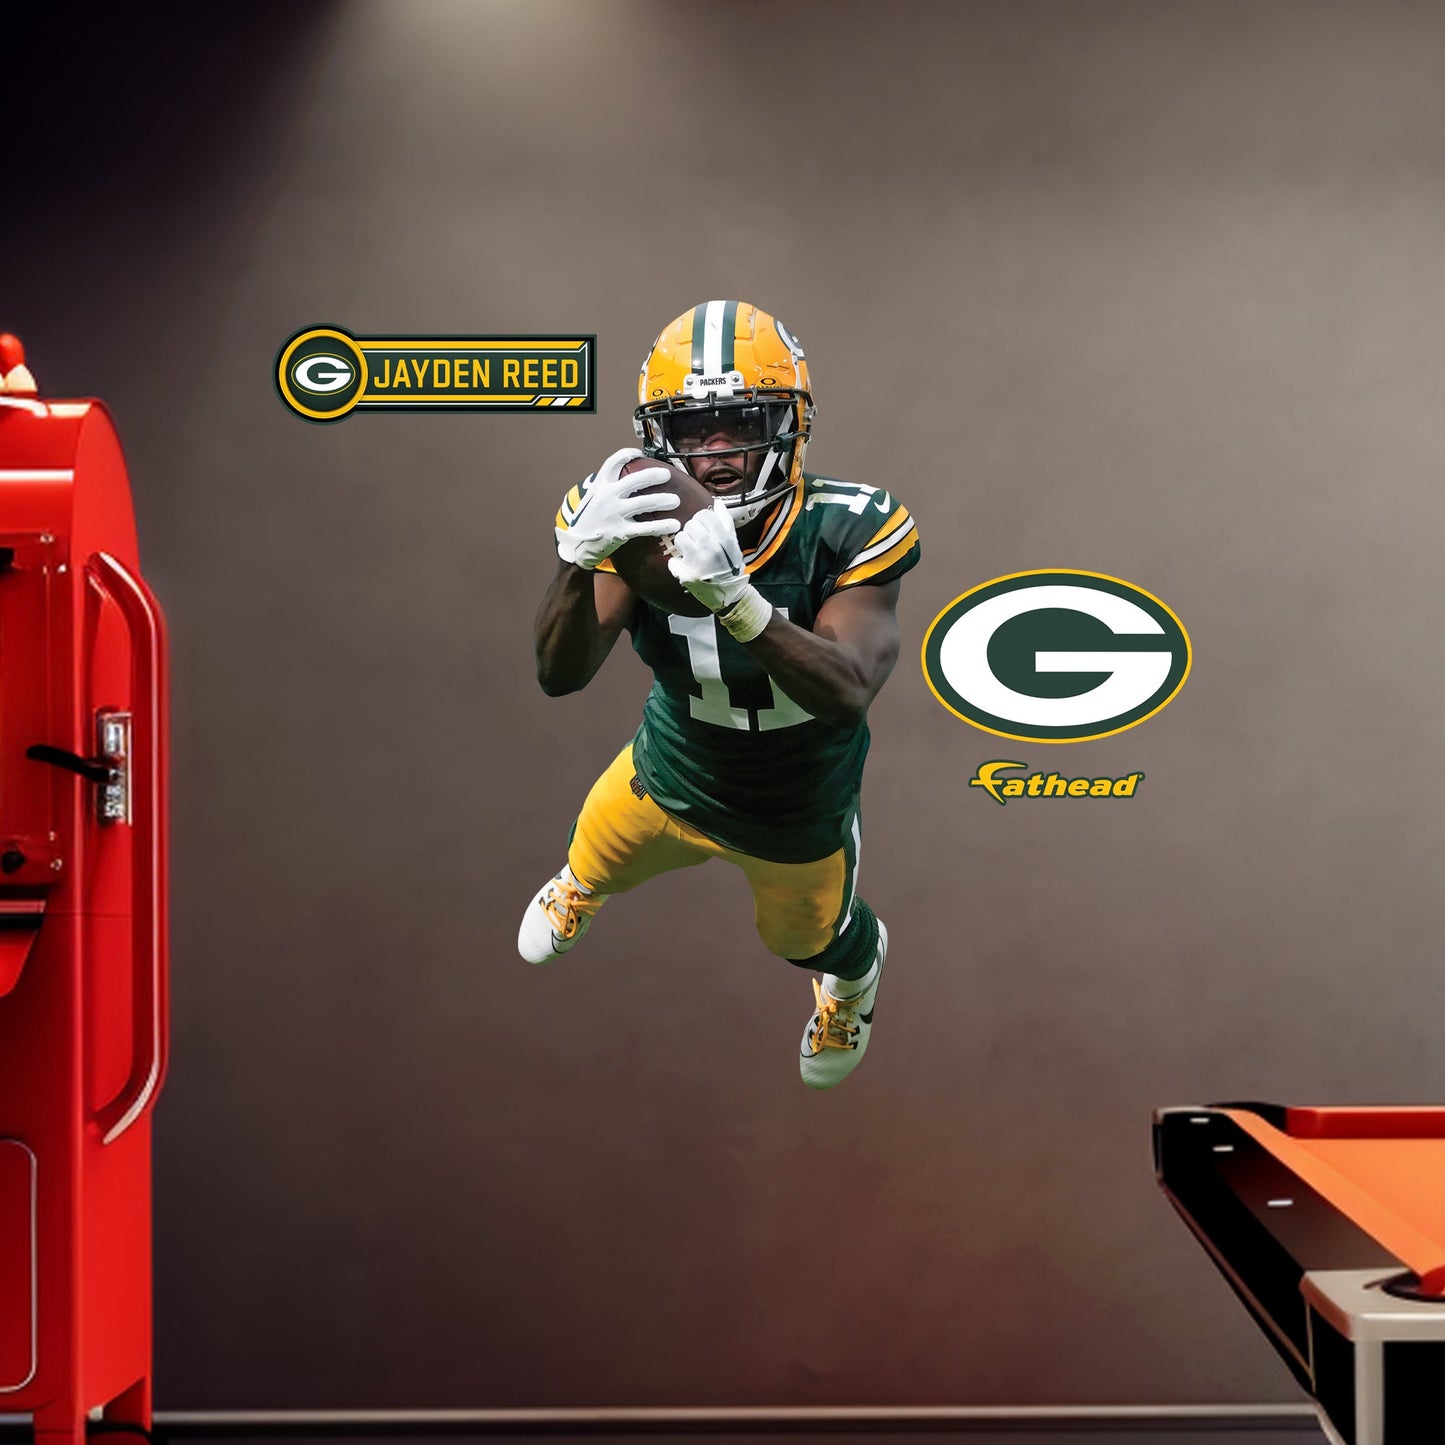 Green Bay Packers: Jayden Reed Diving Catch        - Officially Licensed NFL Removable     Adhesive Decal